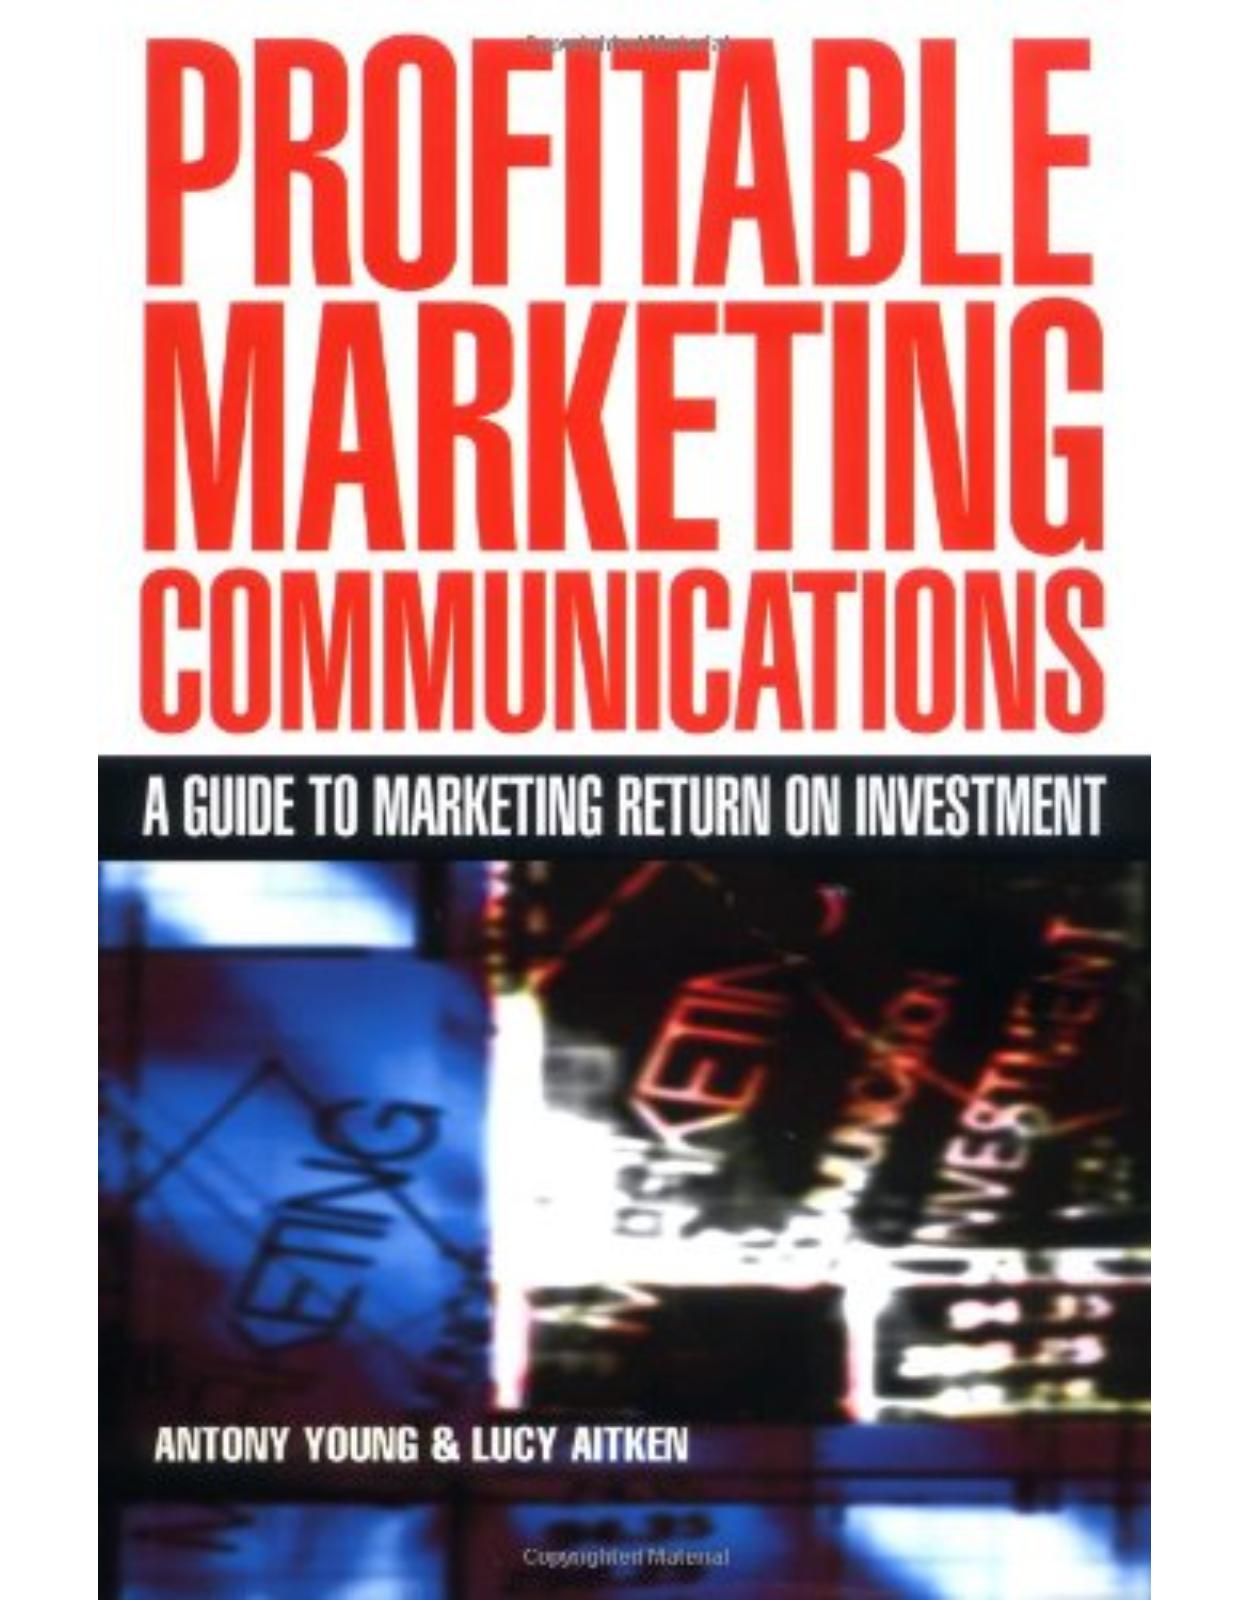 Profitable Marketing Communications: A Guide to Marketing Return on Investment